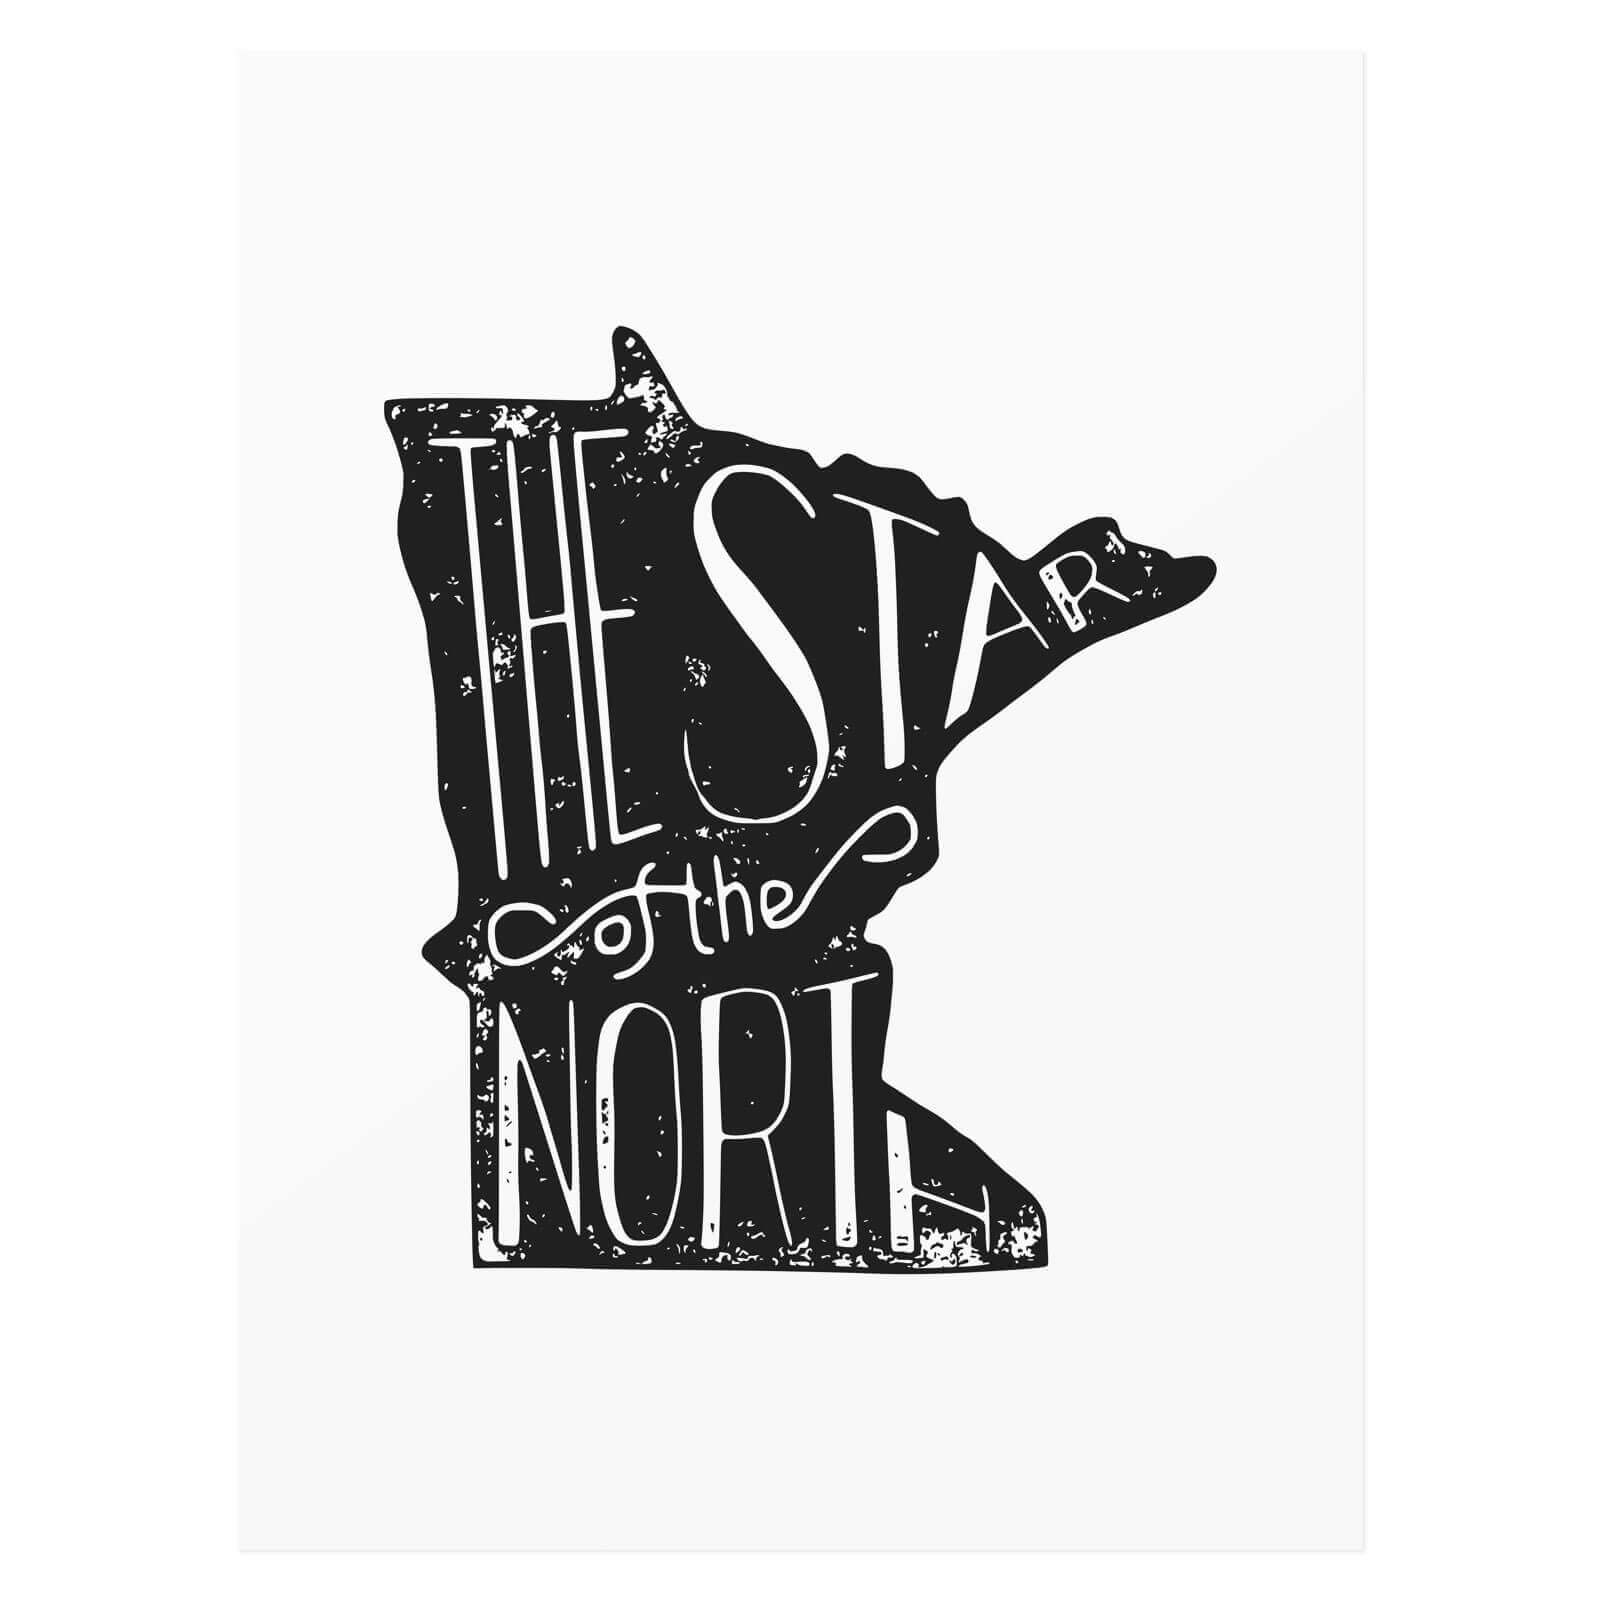 Minnesota — The star of the north